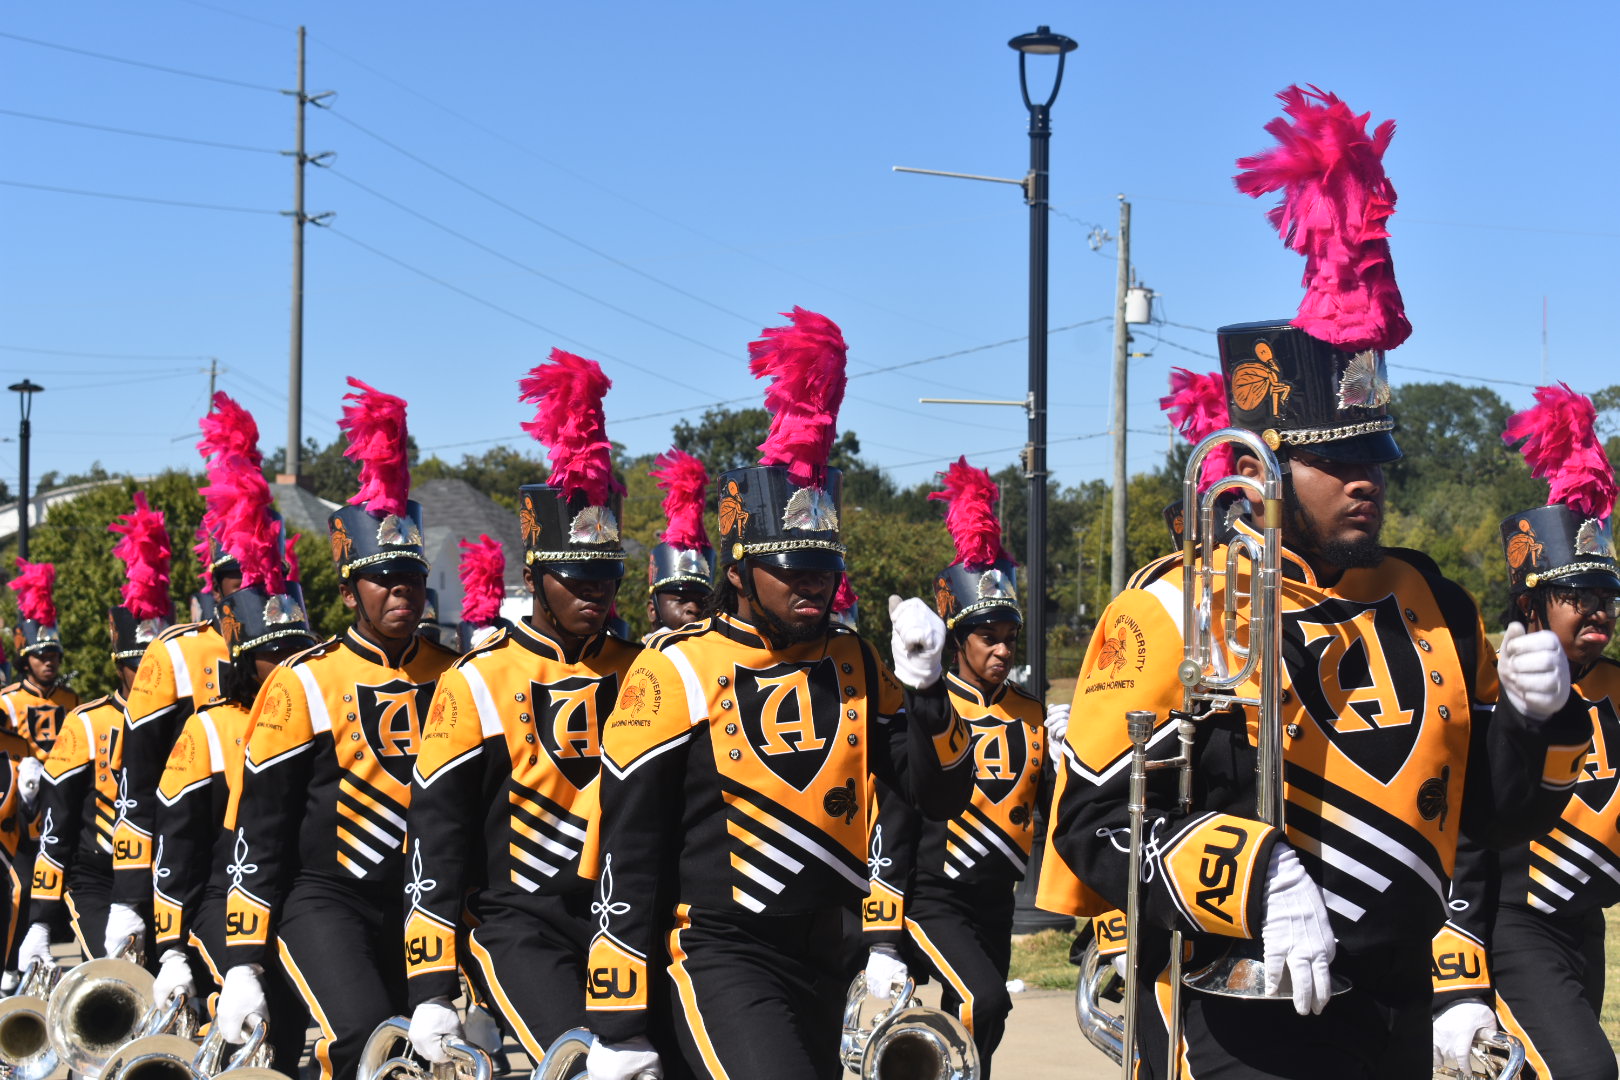 HBCU Homecoming Chronicles: A Hornet Affair at Alabama State University